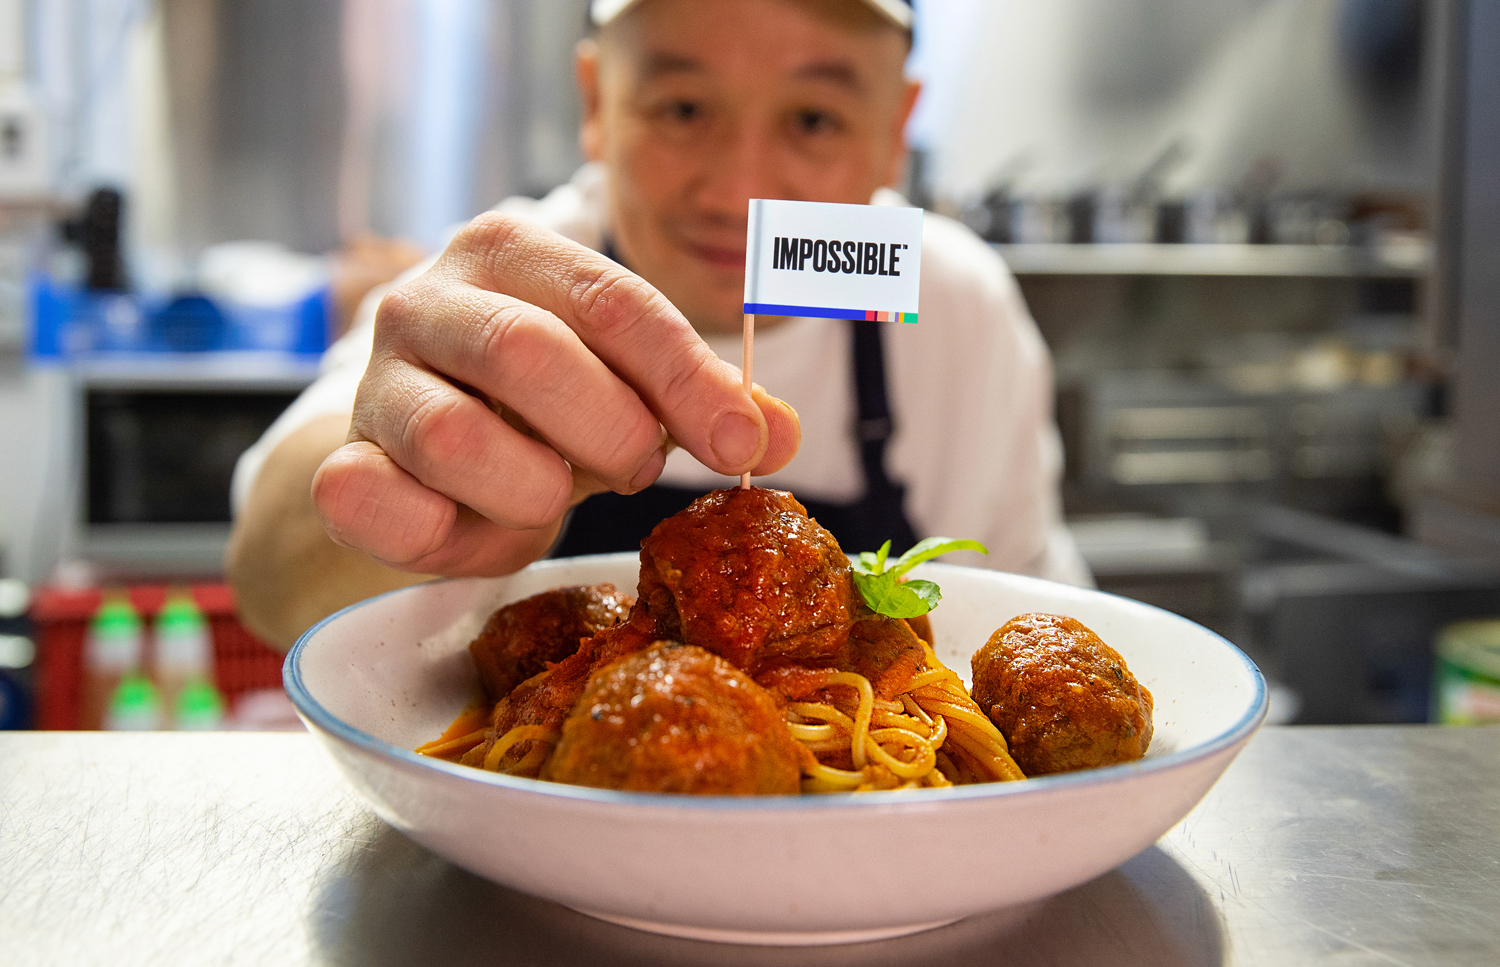 A man places a flag reading Impossible in a meatball that is part of a bowl of spaghetti and meatballs.